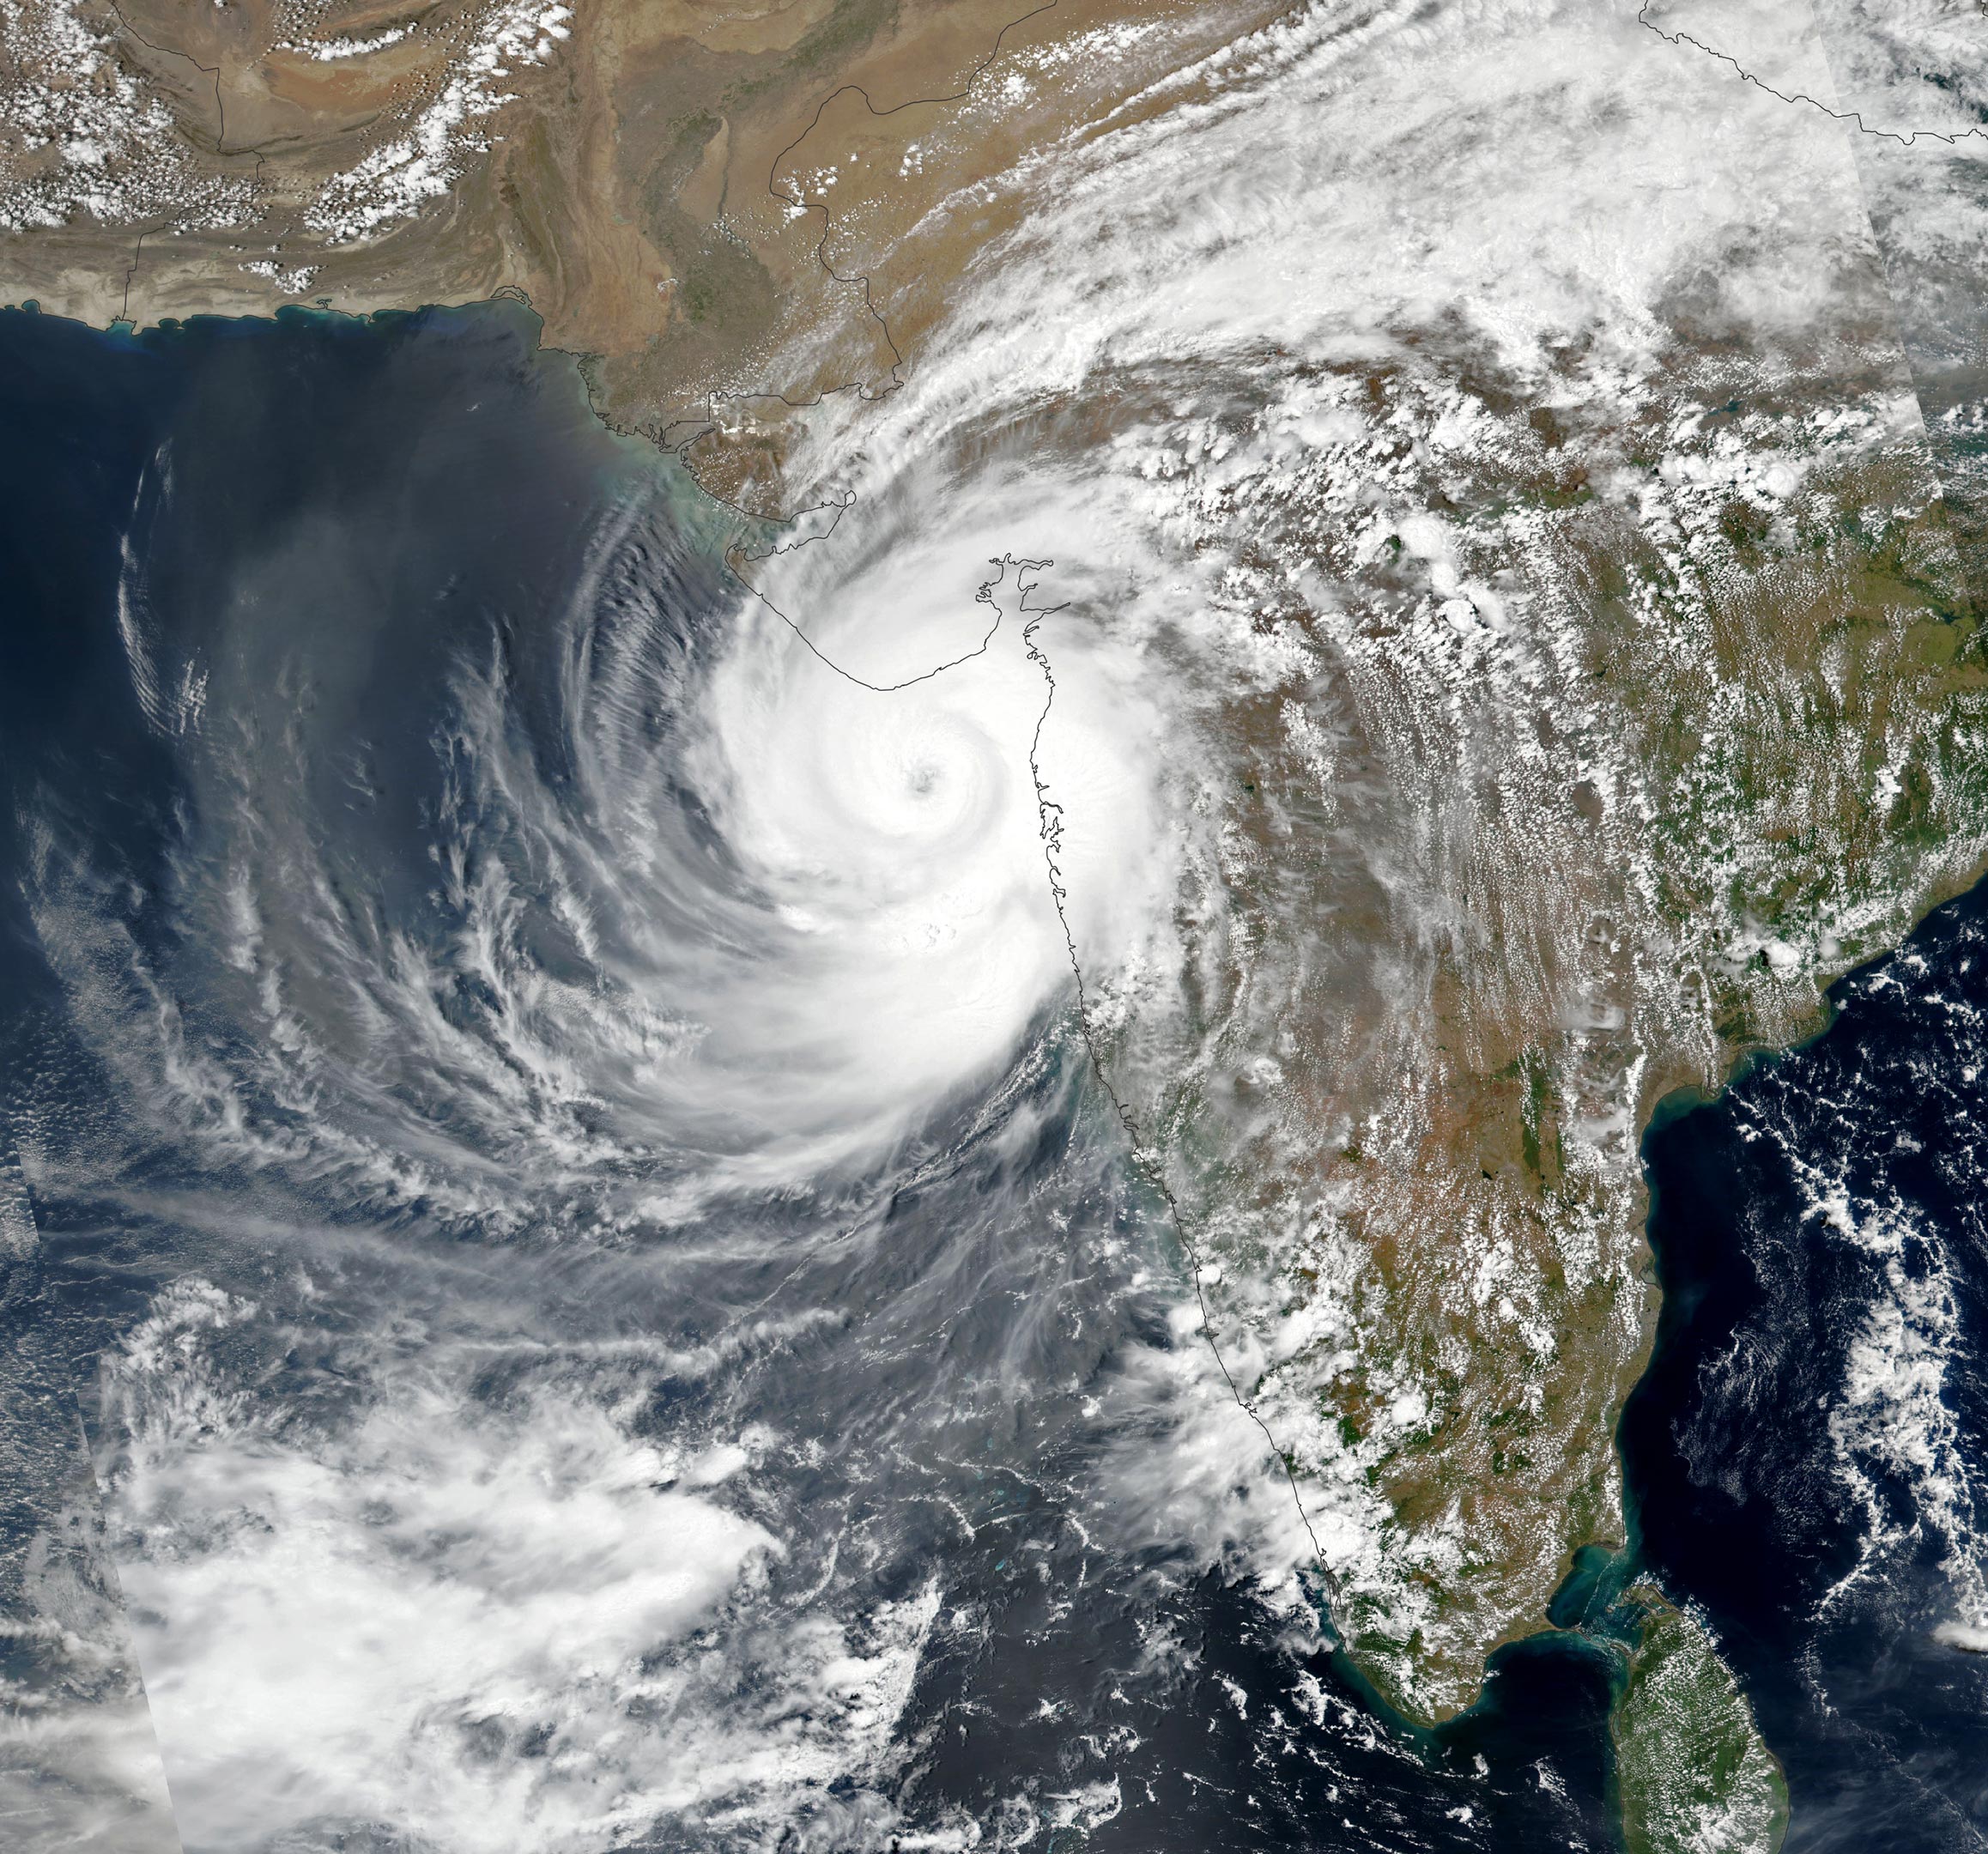 cyclone case study in india